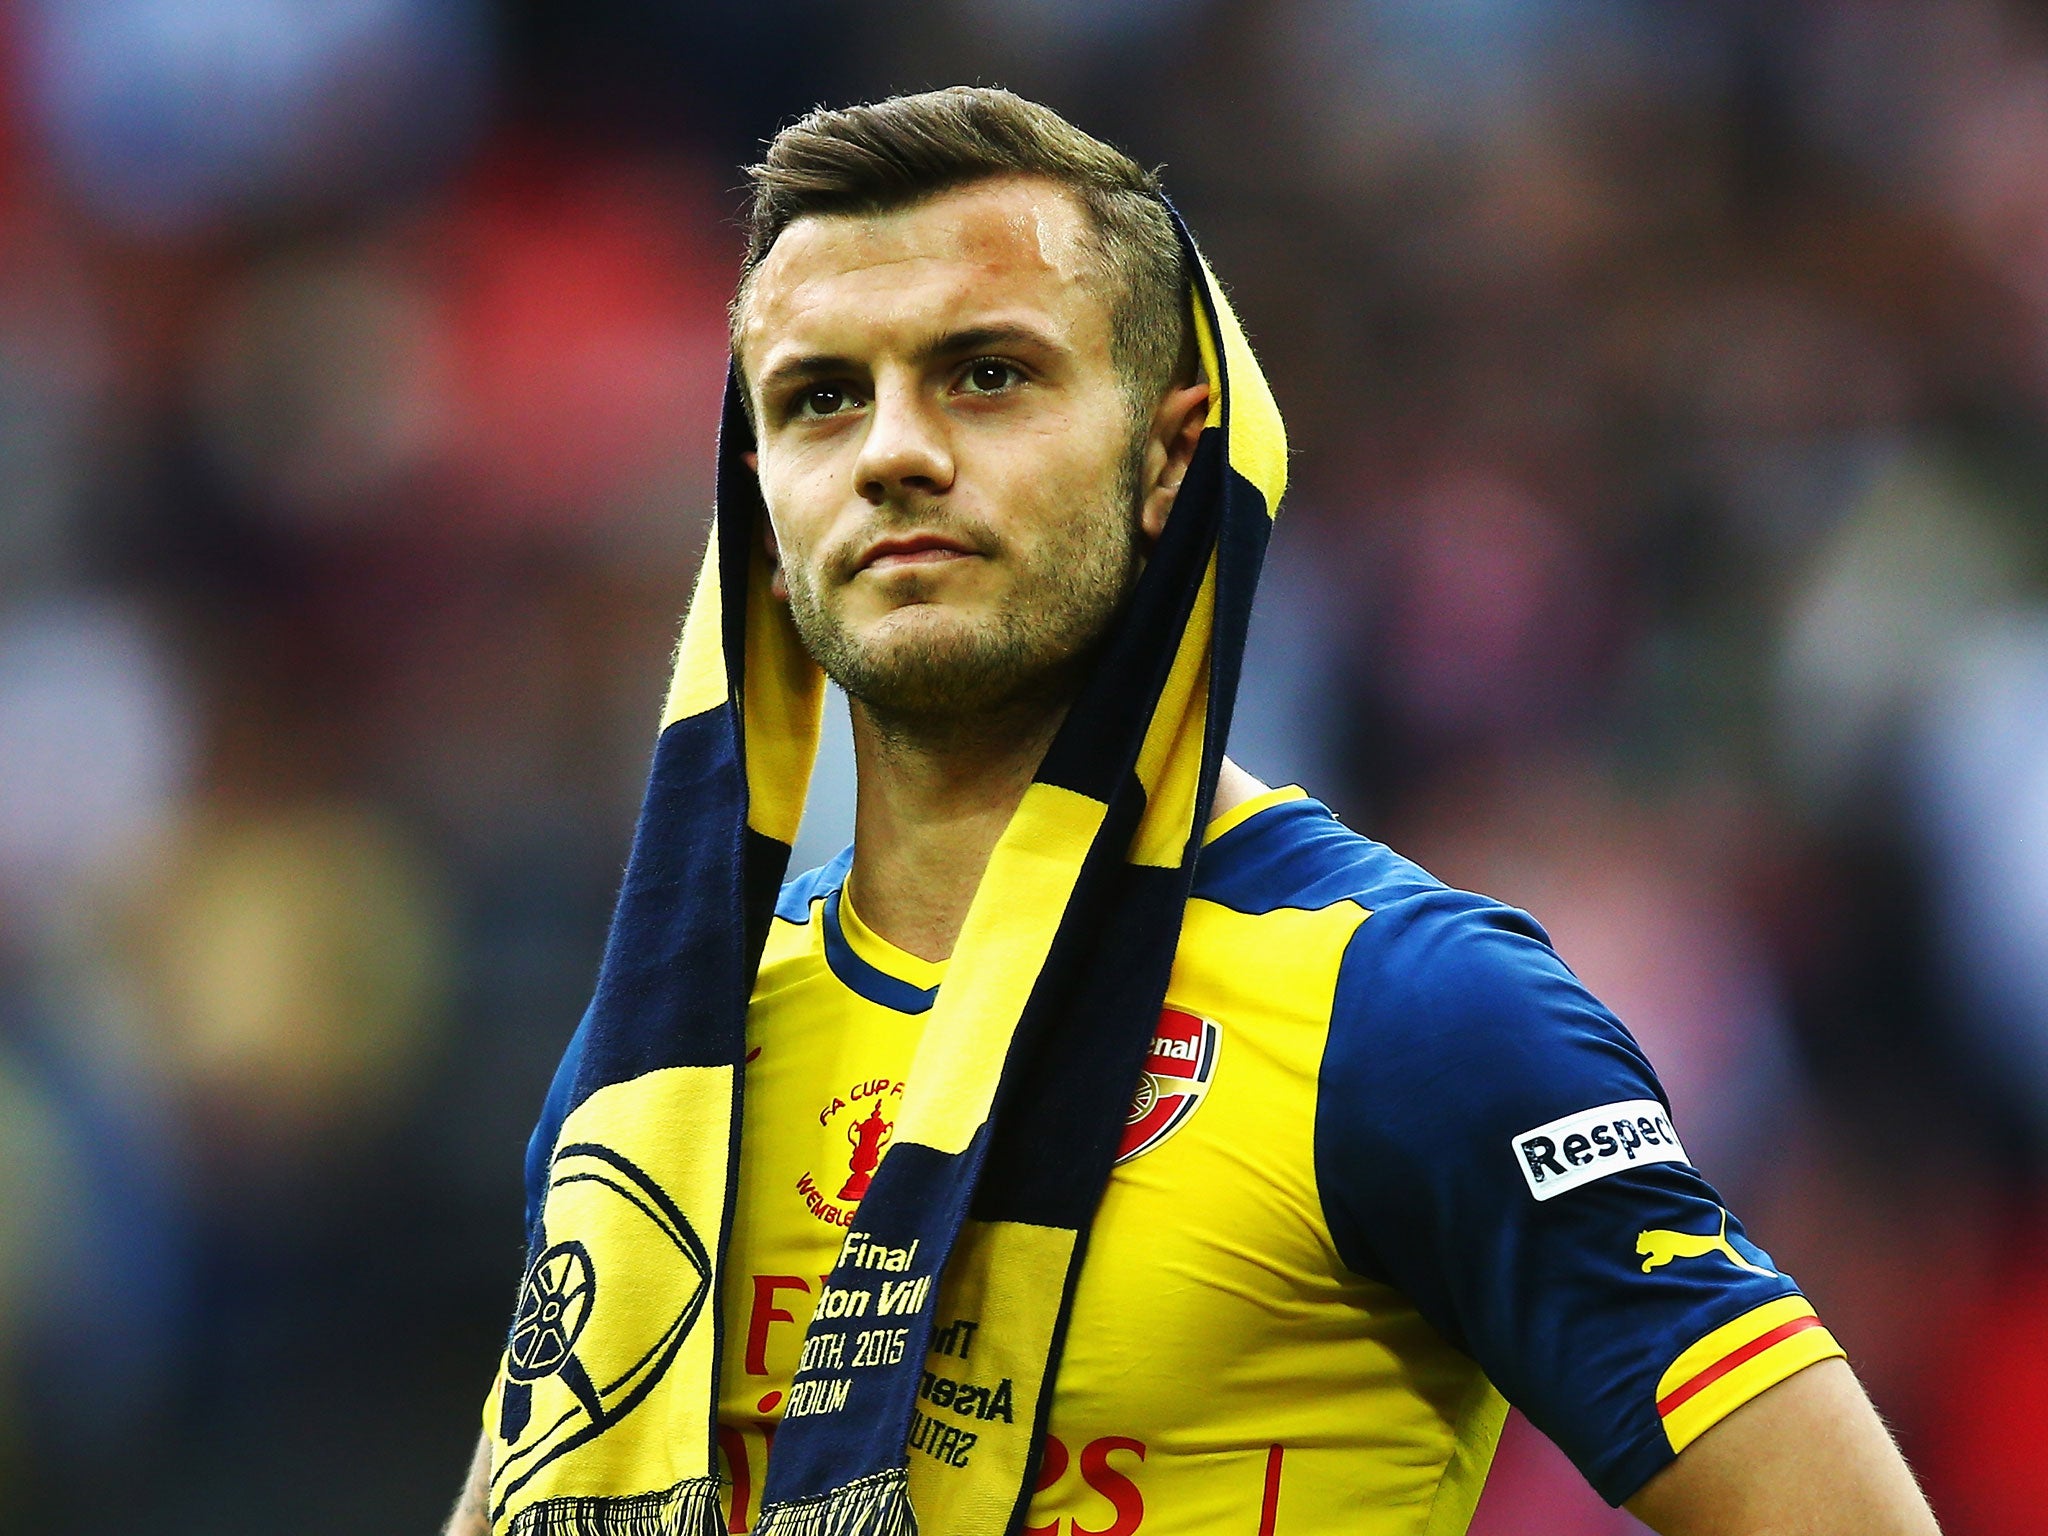 Jack Wilshere was given a cameo role at Wembley